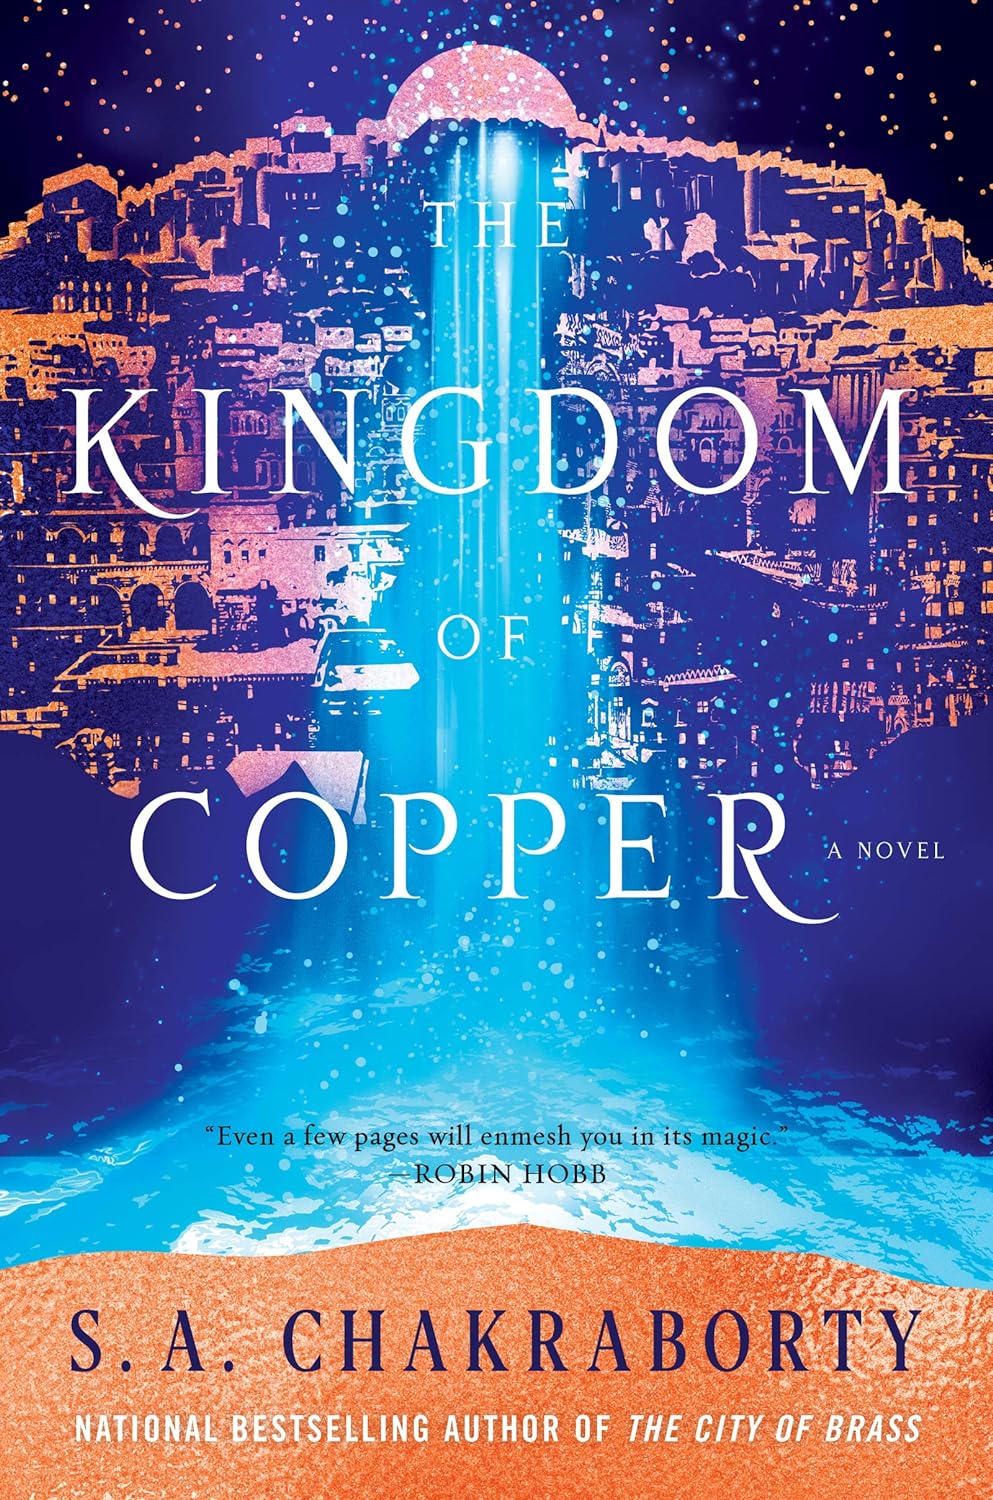 S. A. Chakraborty, S. A Chakraborty: The Kingdom of Copper (Hardcover, 2019, Harper Voyager)